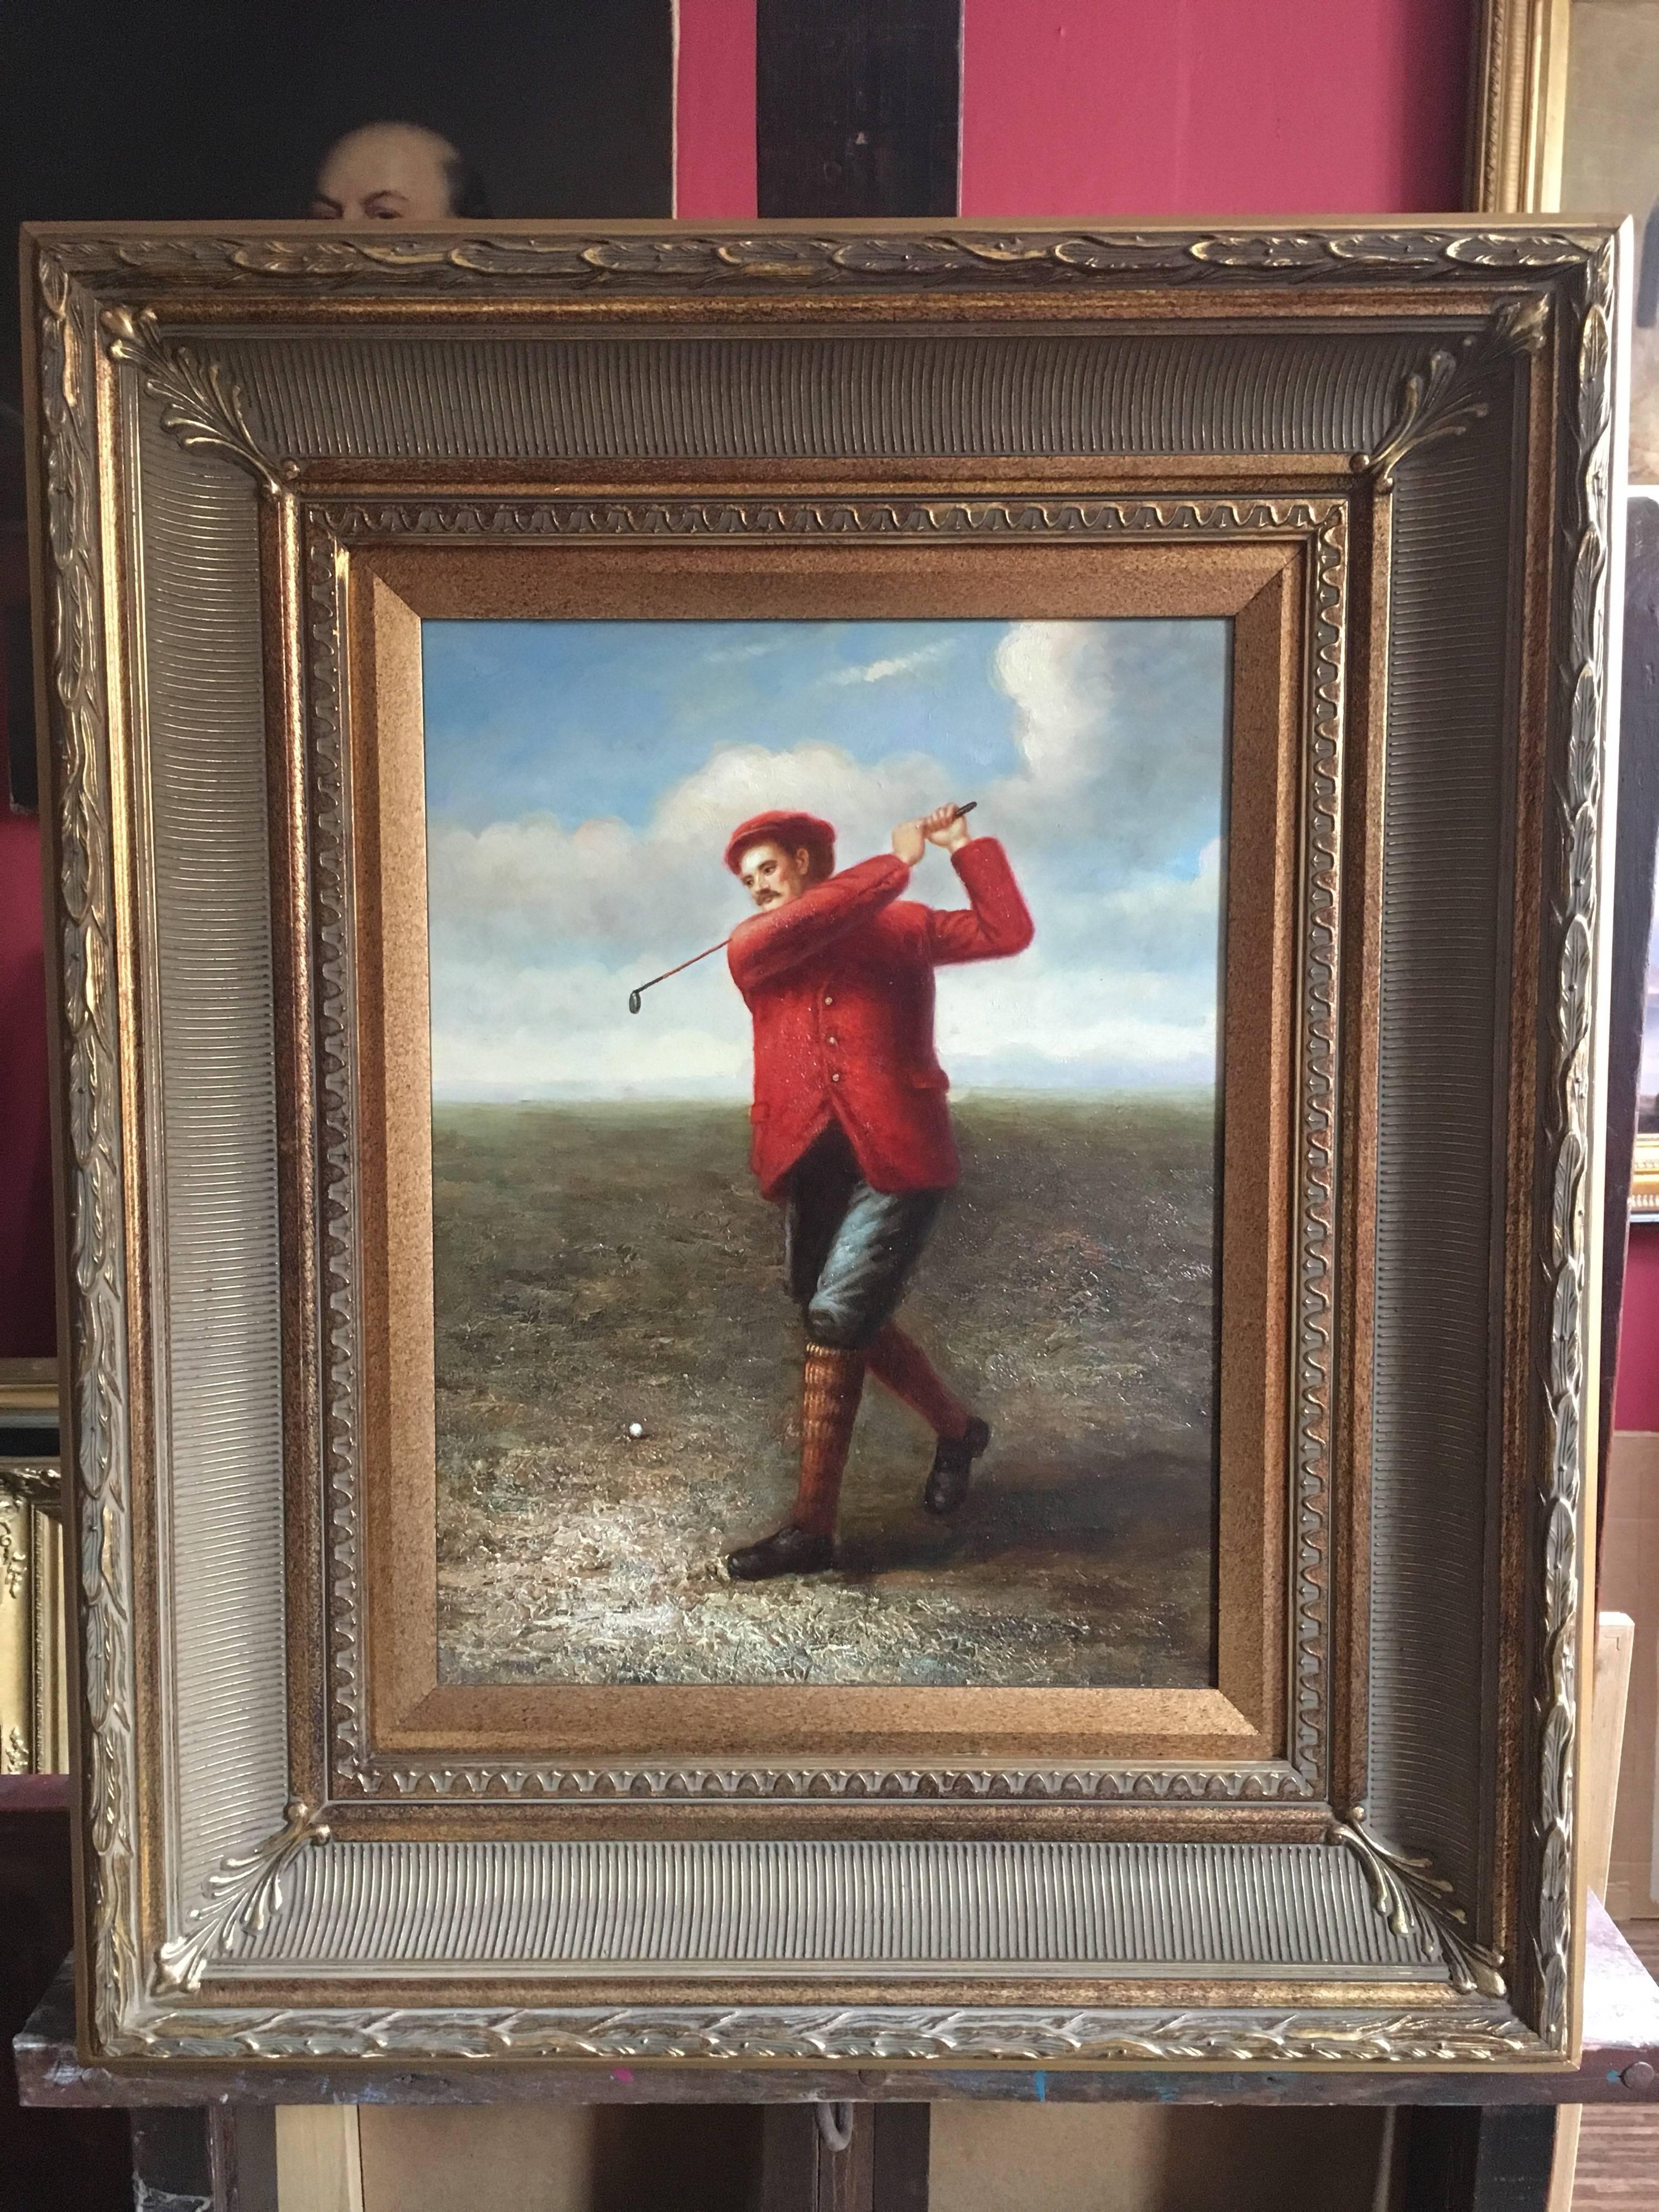 The Golfer
unsigned, 20th Century
Oil painting on canvas, framed
Framed size: 25 x 21 inches

Stylish portrait of a dapper gentlemen in his tailored red sports jacket, matching hat and club. Definitely a painting for the golfing enthusiast. 

The